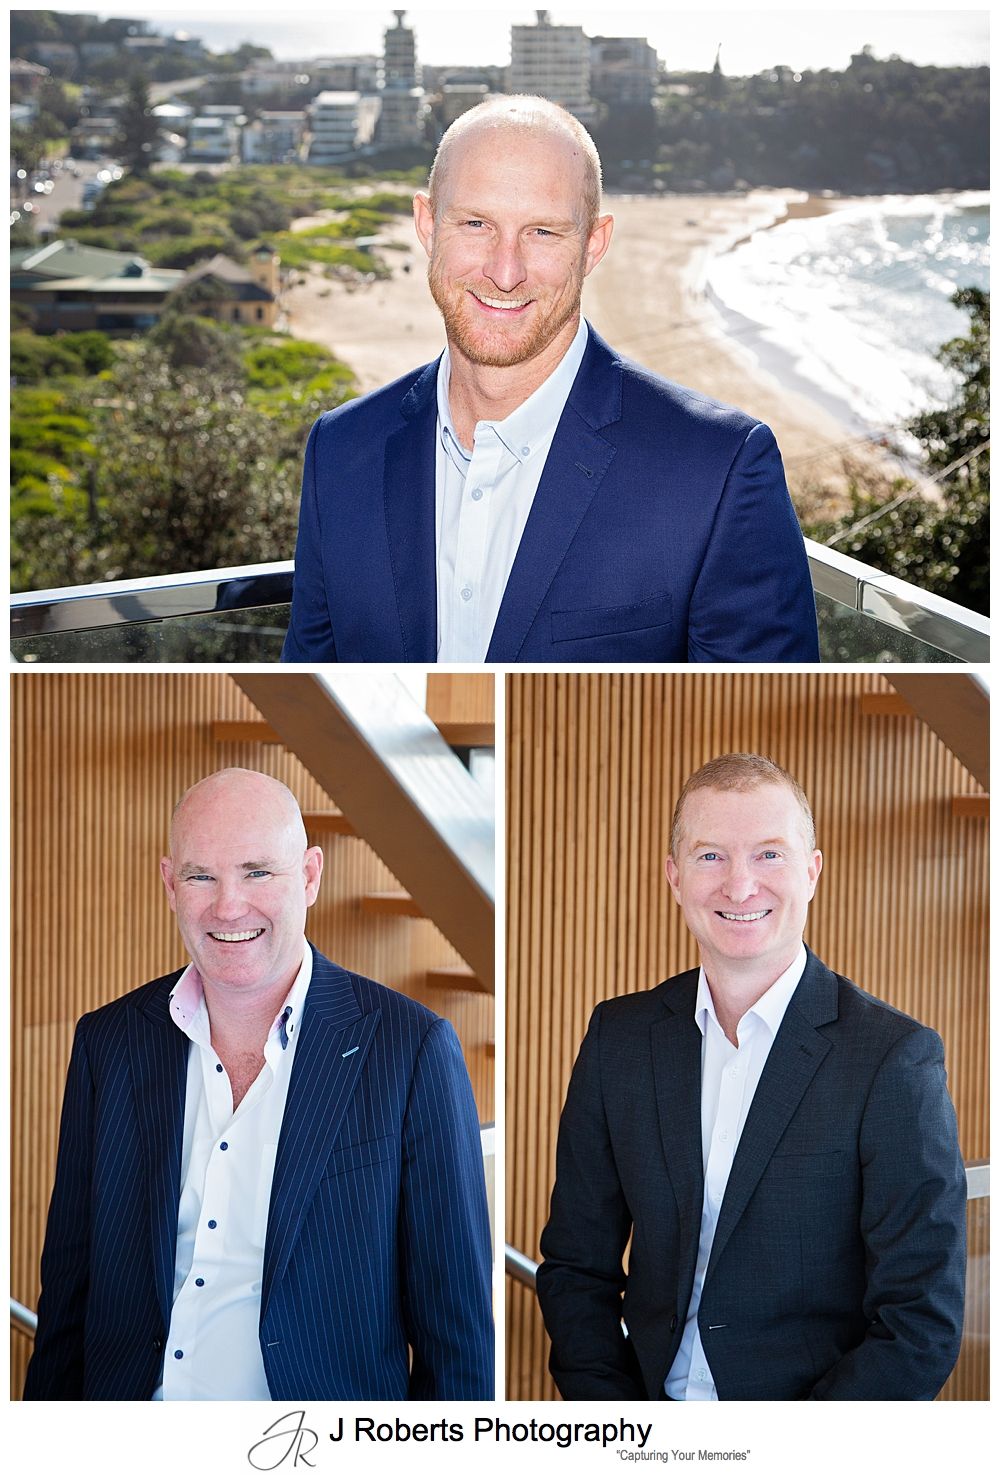 Mentor1 Corporate Headshots at Freshwater Beach Location